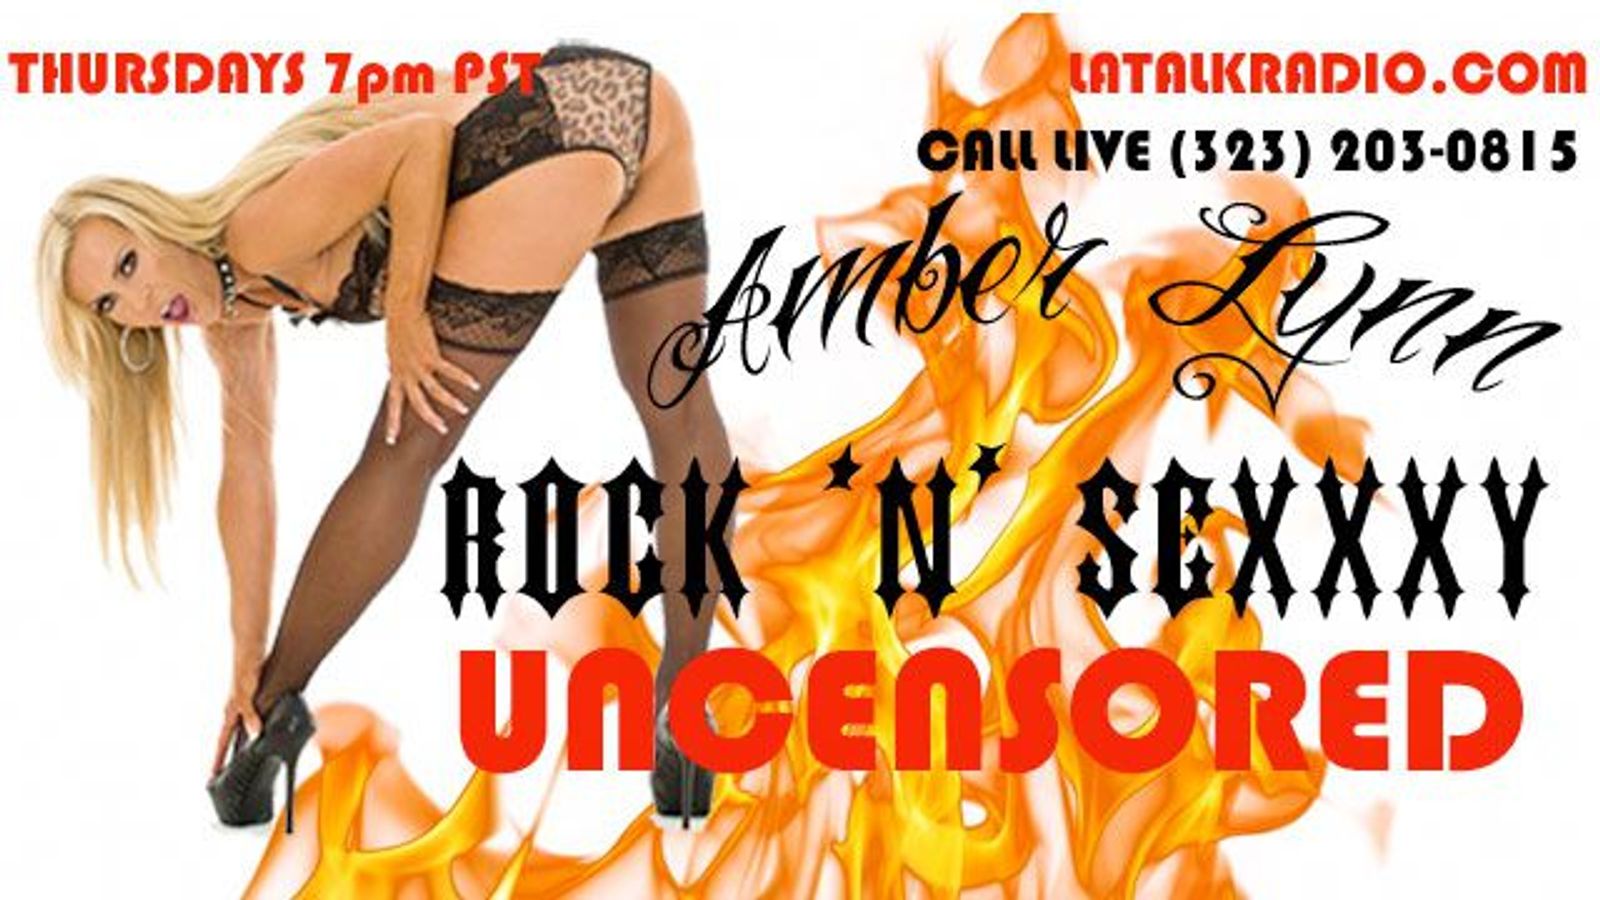 Amber Lynn Rock'N'Sexxxy Uncensored Now on Stitcher, iTunes